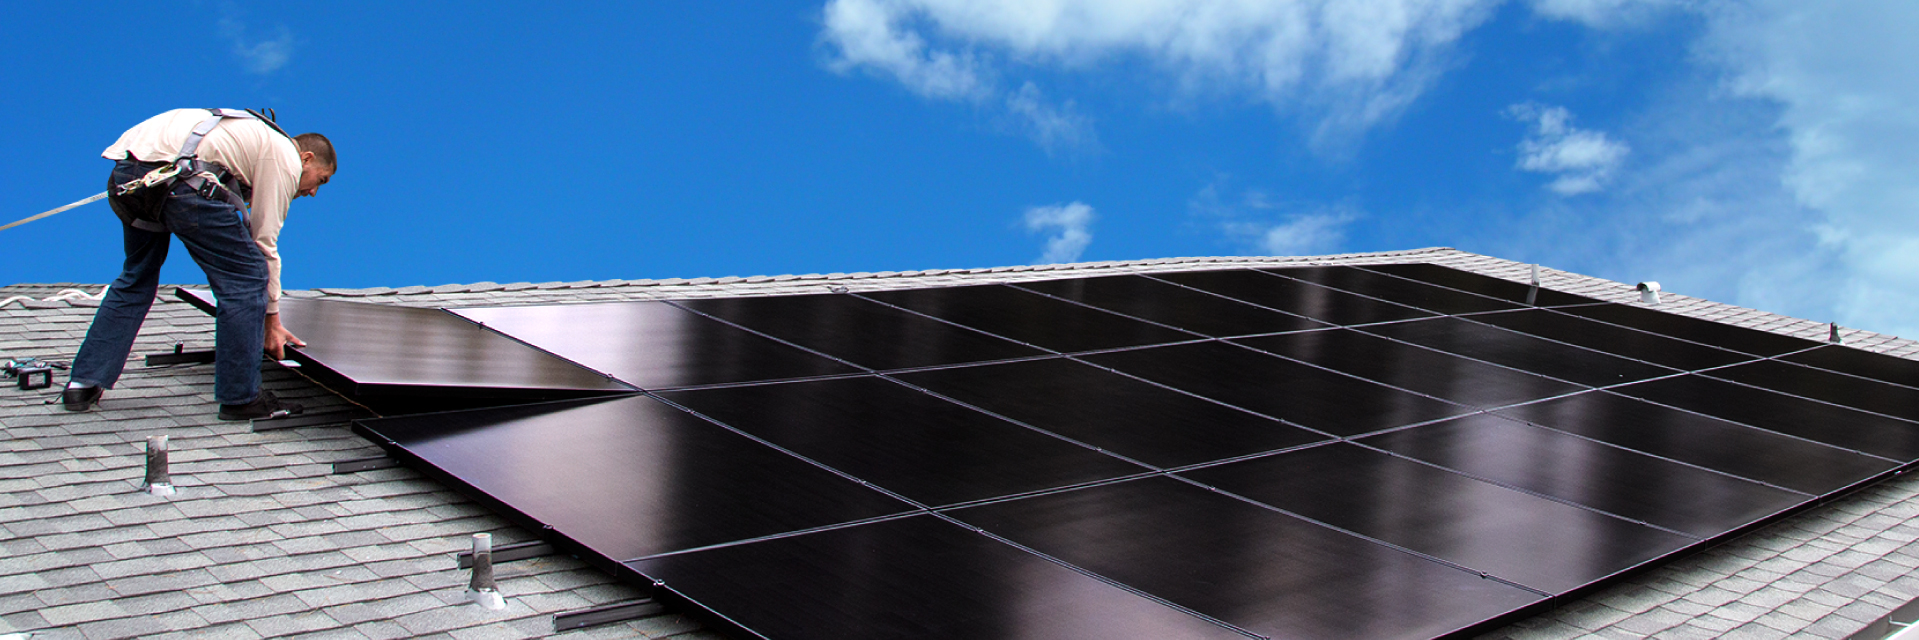 Solar Companies Tampa: Find the Best Solar Installers in the Area